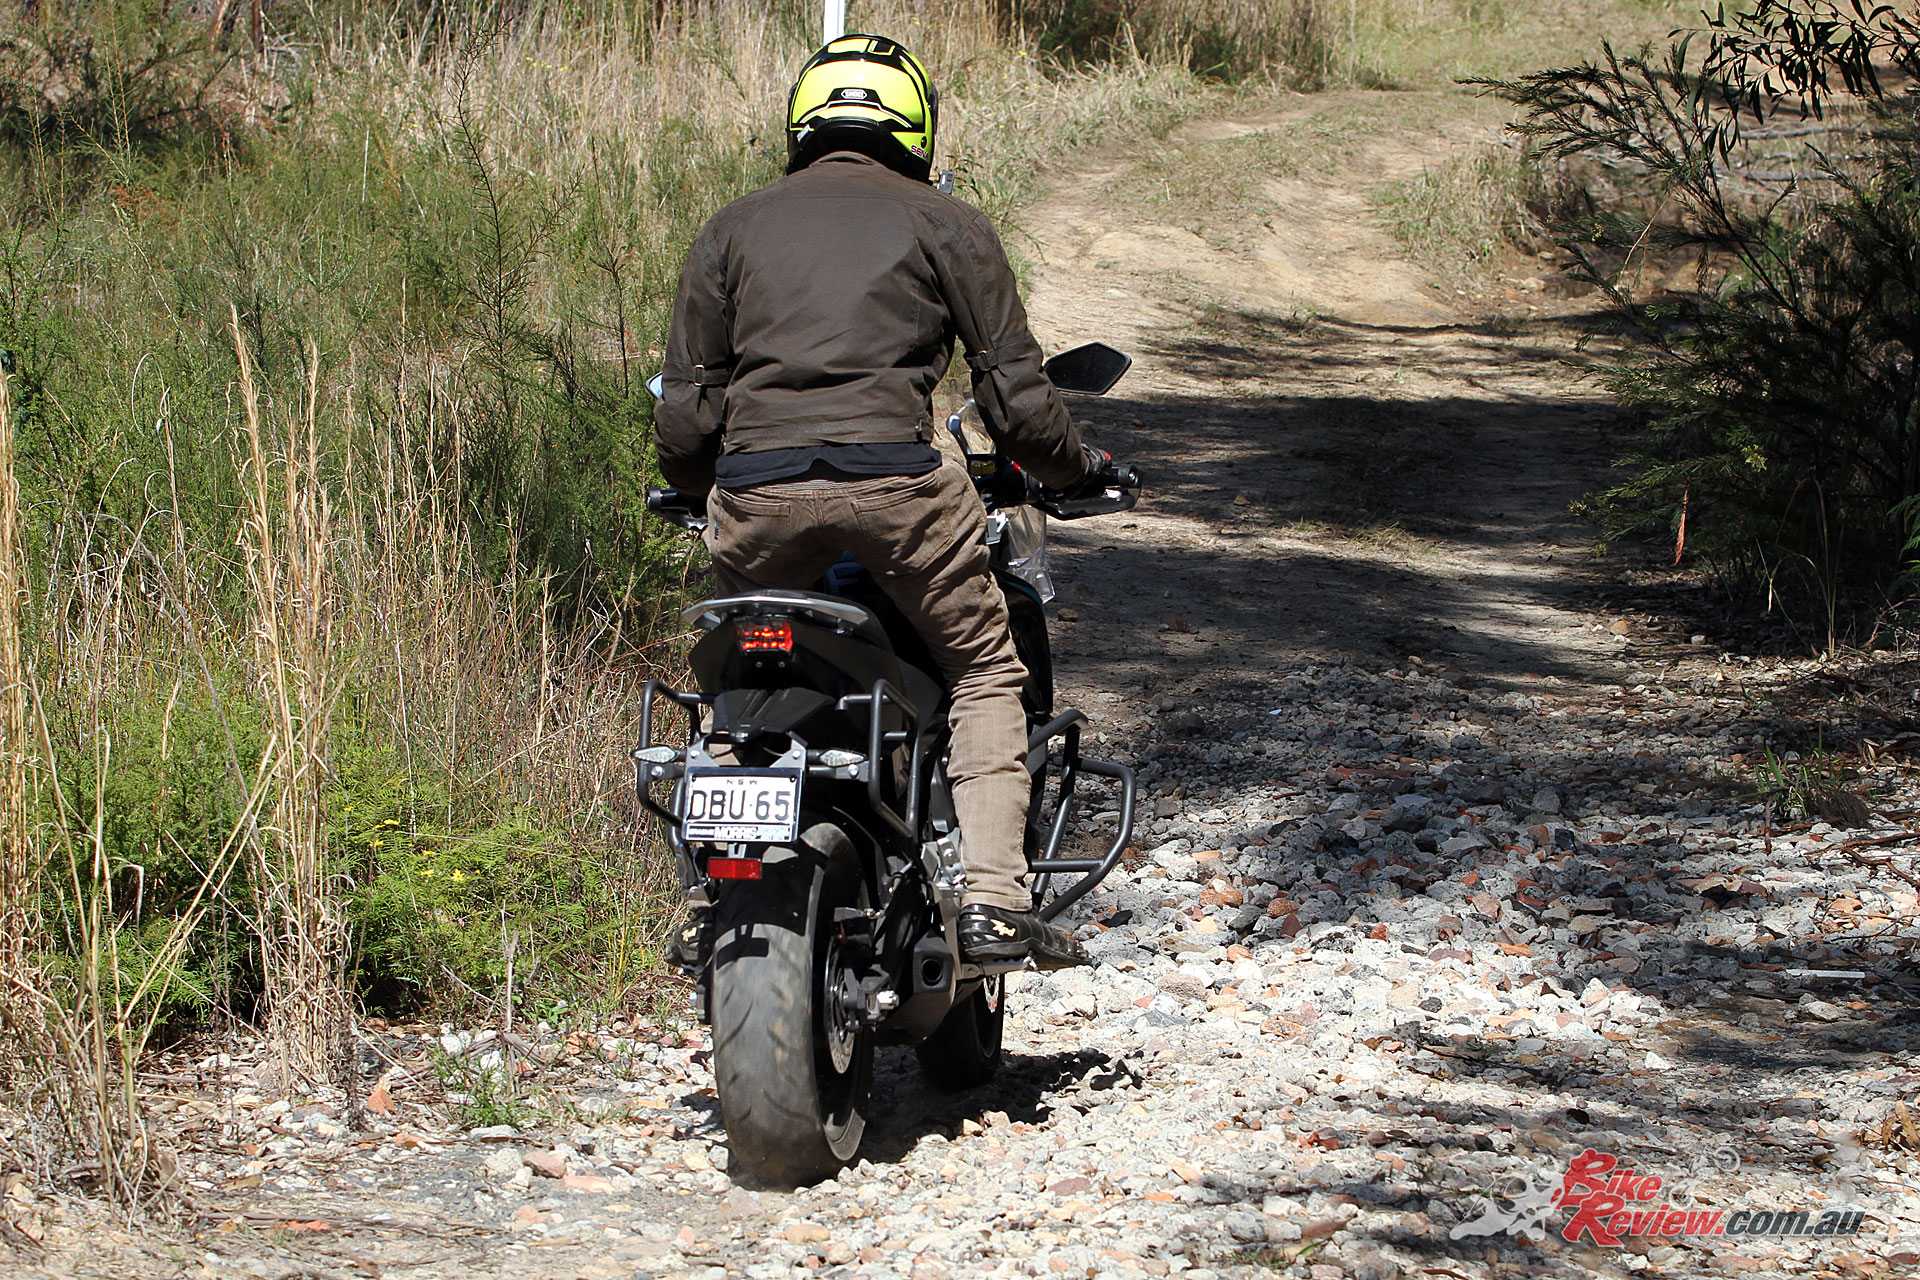 The 650MT will power through most situations and is very confidence inspiring for fire trails and unsealed roads